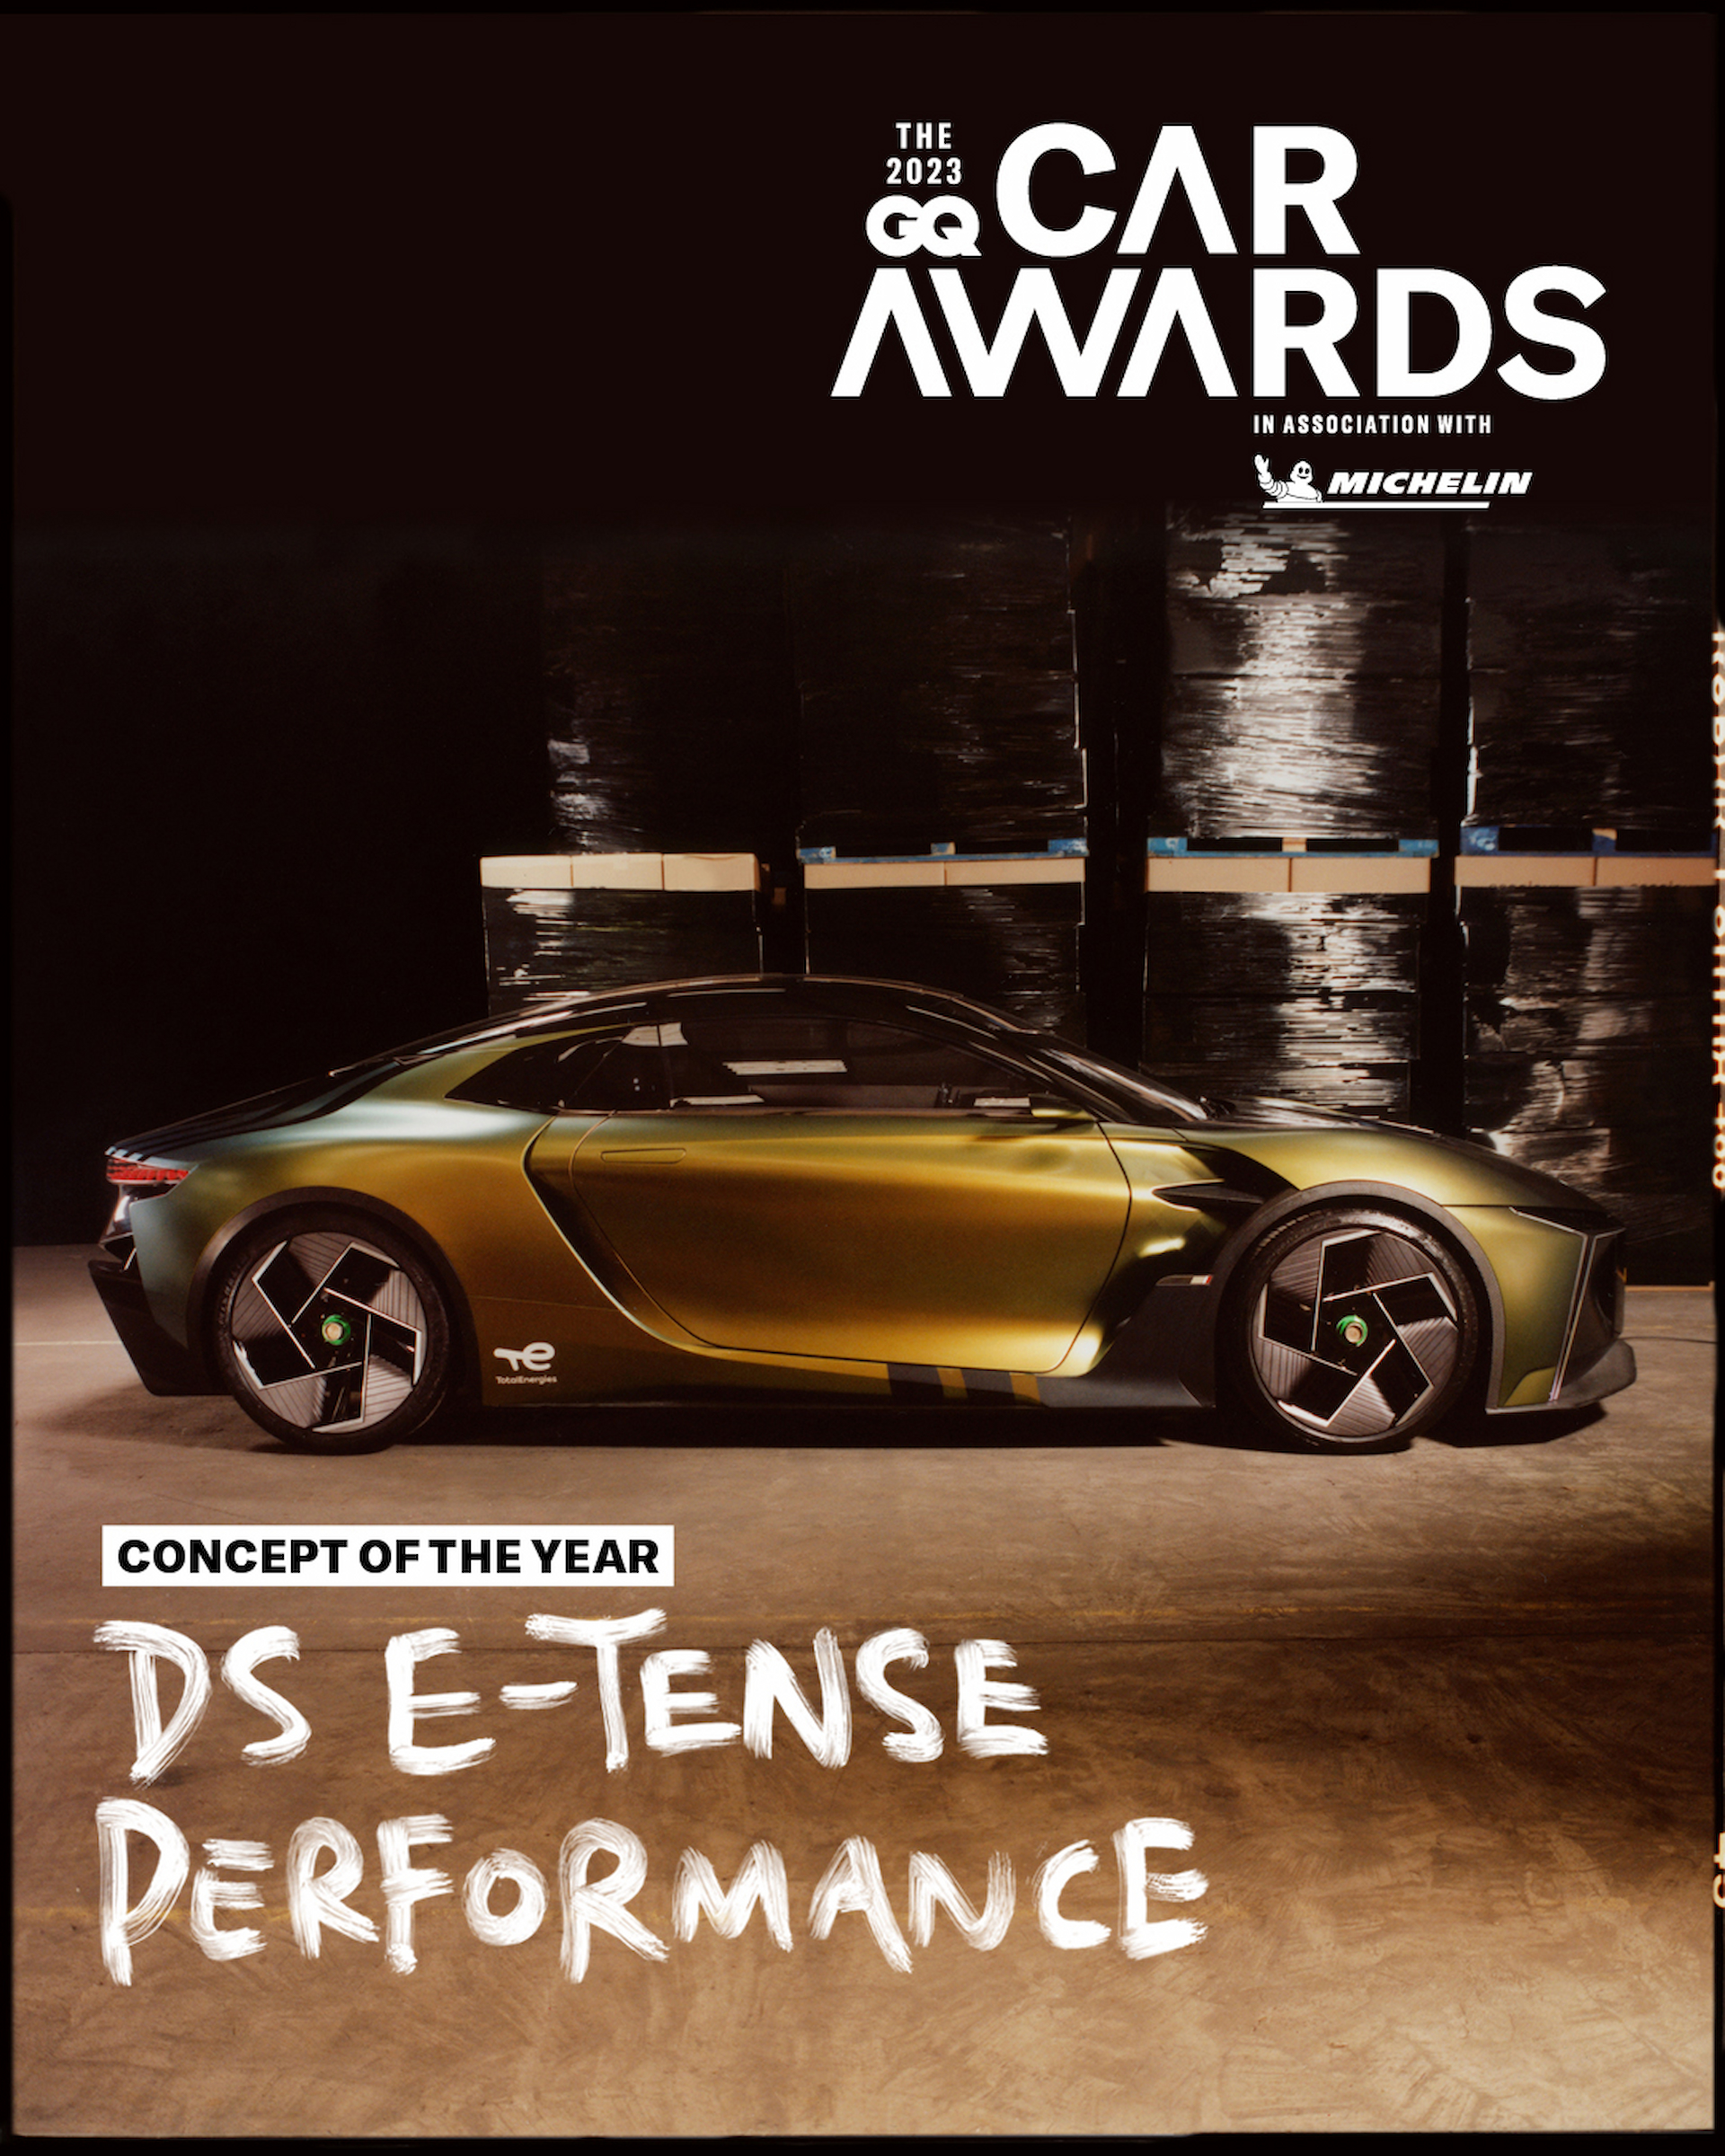 Ds E Tense Performance Named Concept Of The Year At 2023 Gq Car Awards